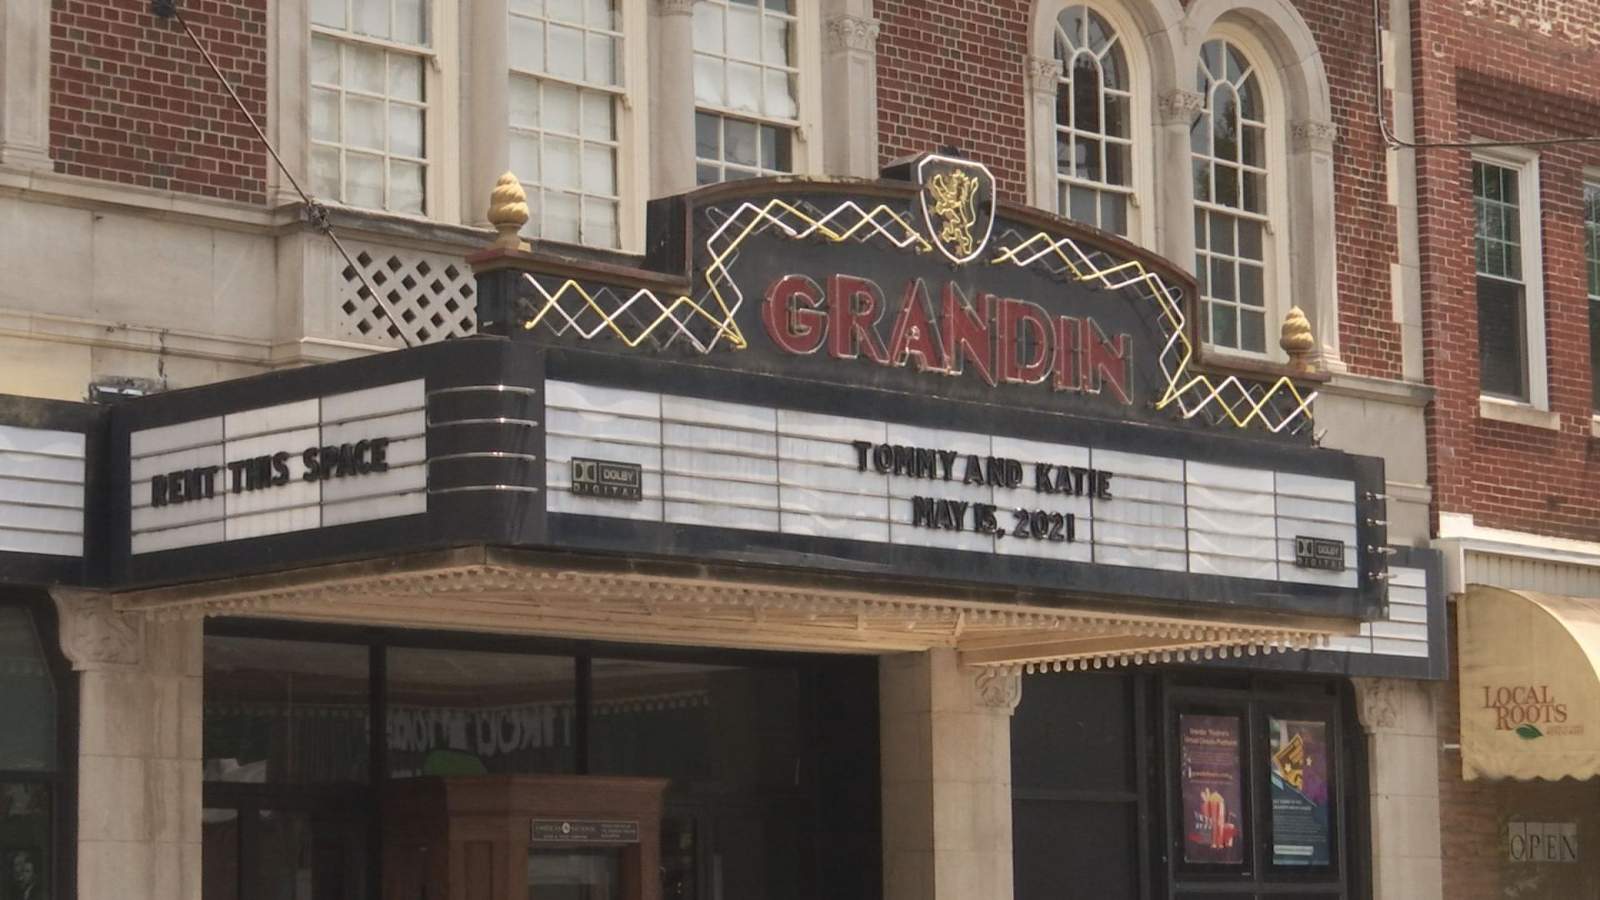 Grandin Theatre showing classic movies to kick off its partial reopening